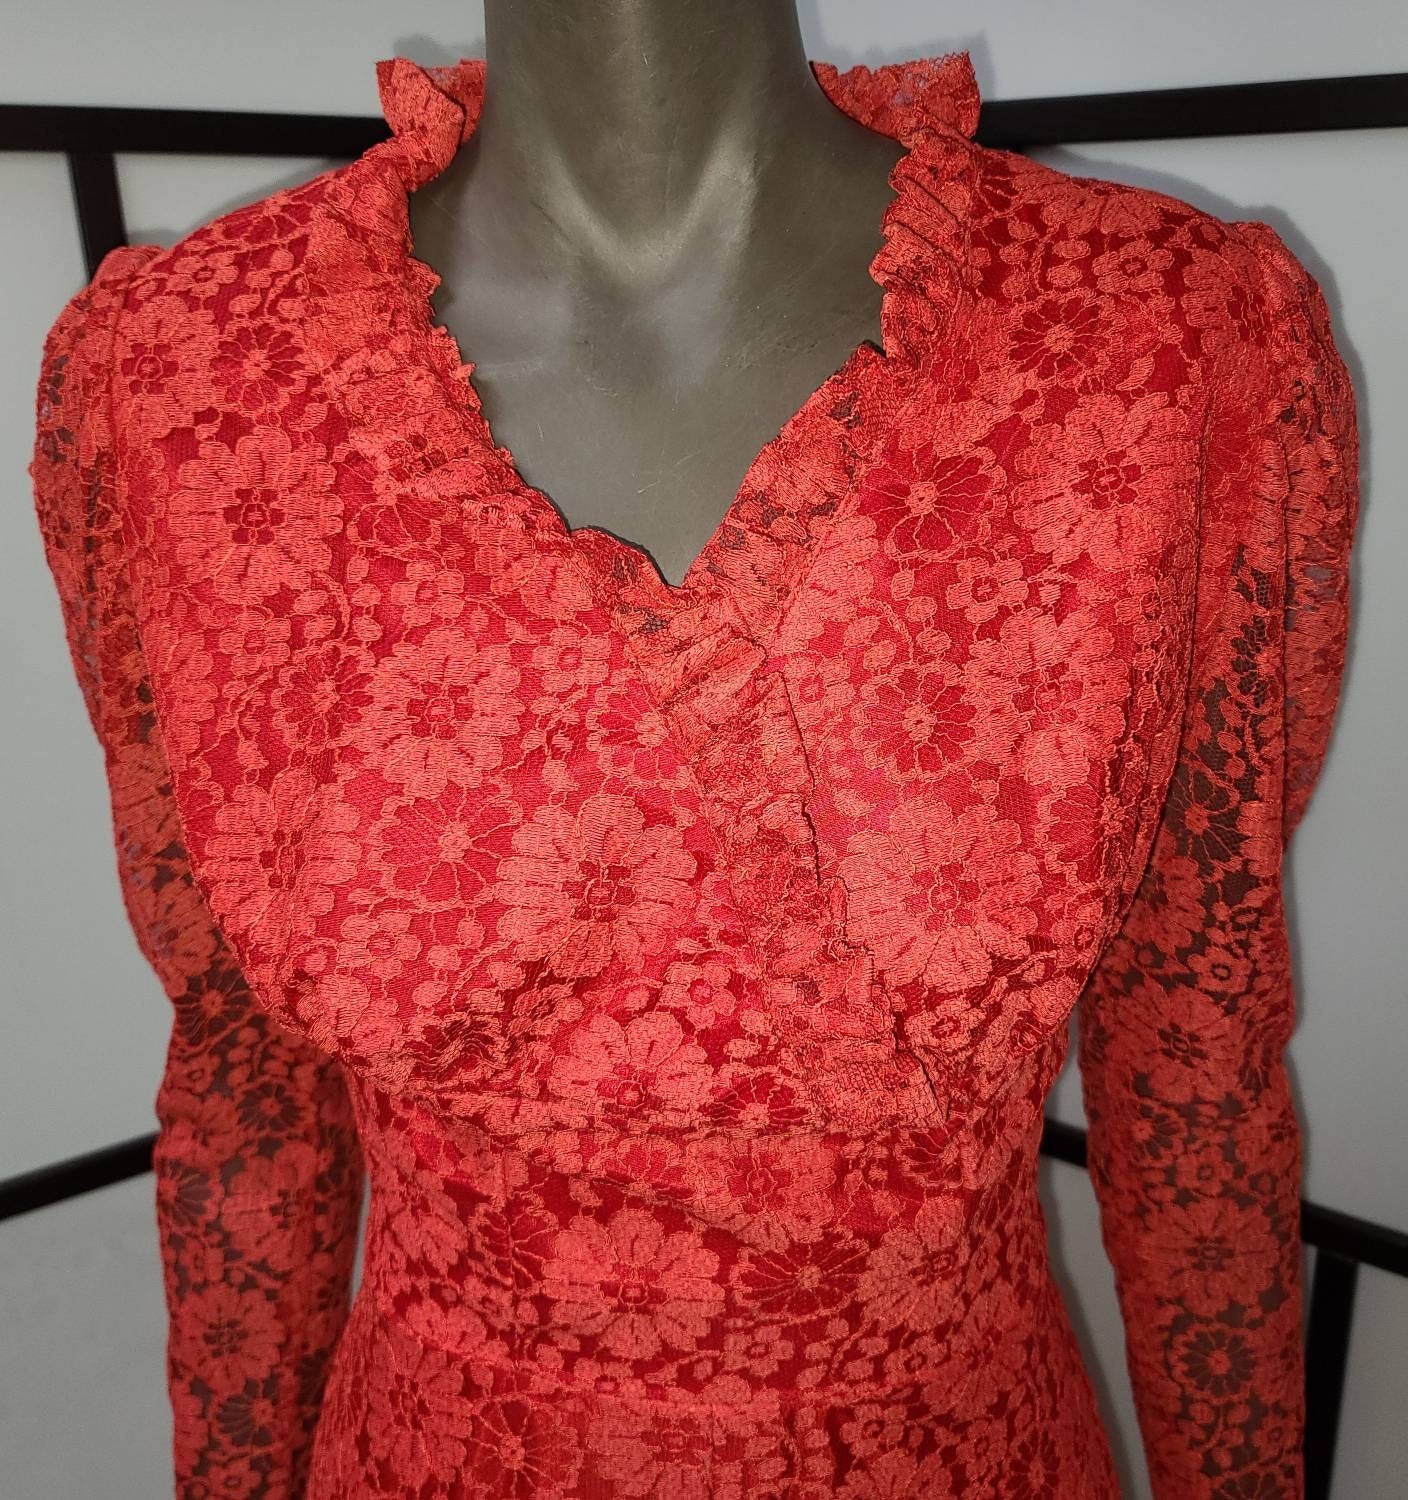 Vintage Lace Dress Long 1960s Red Floral Pattern Lace Dress Sheer Lace Sleeves Stunning Boho Holiday S M